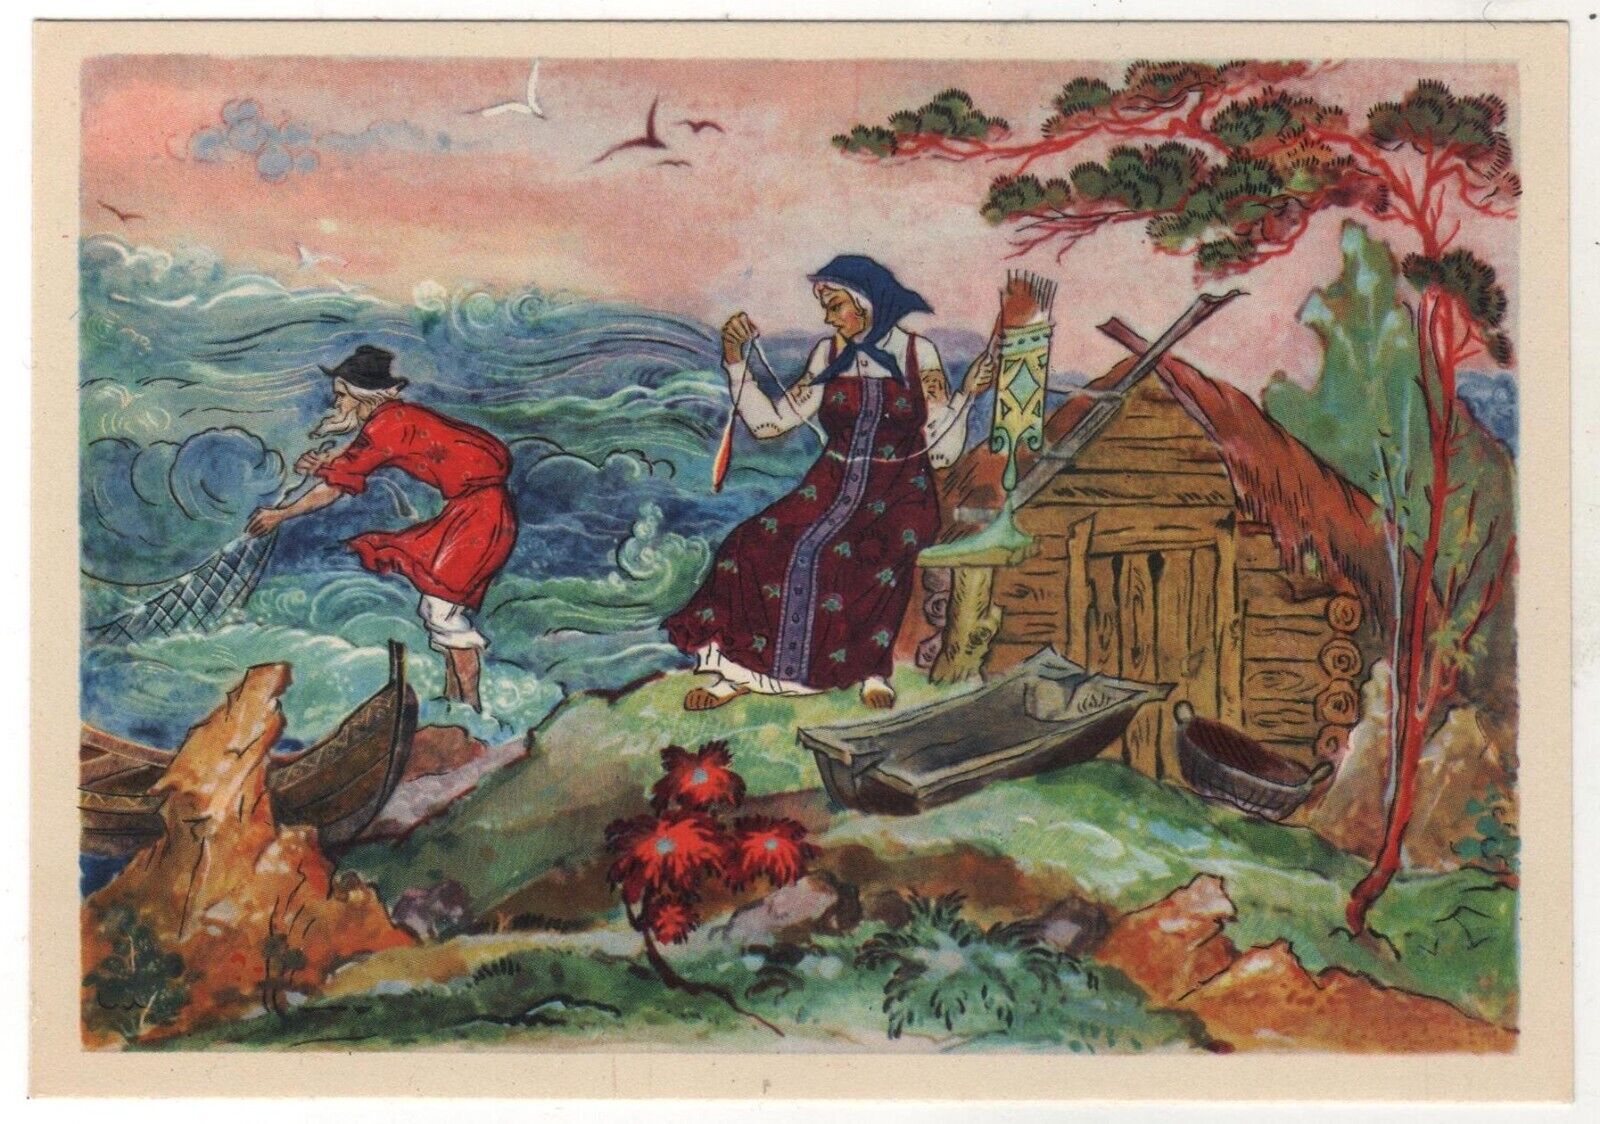 1961 Fairy Tale about the Fisherman & the fish ART Soviet RUSSIAN POSTCARD Old